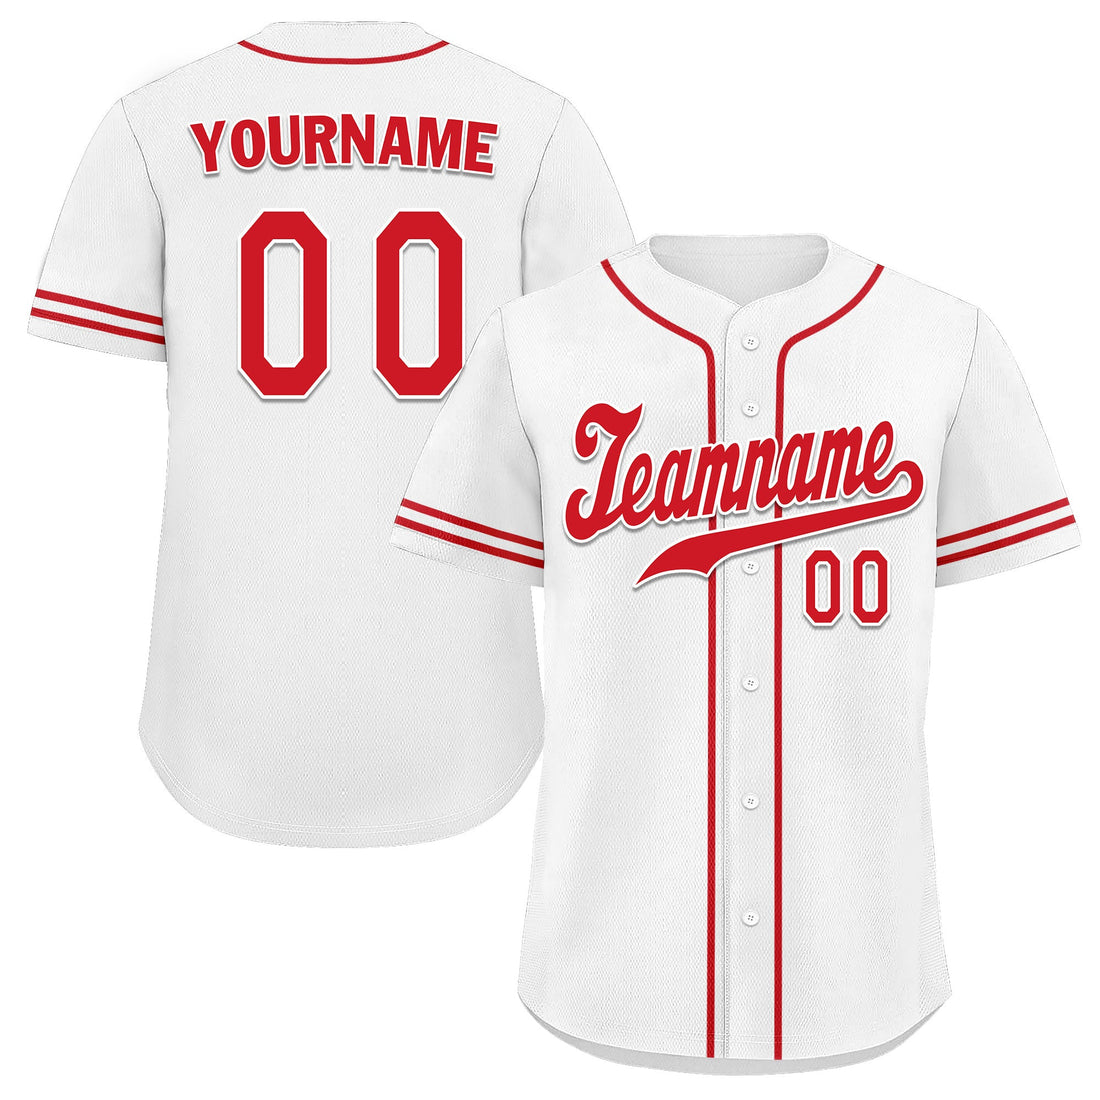 Custom White Classic Style Red Personalized Authentic Baseball Jersey UN002-bd0b00d8-ce